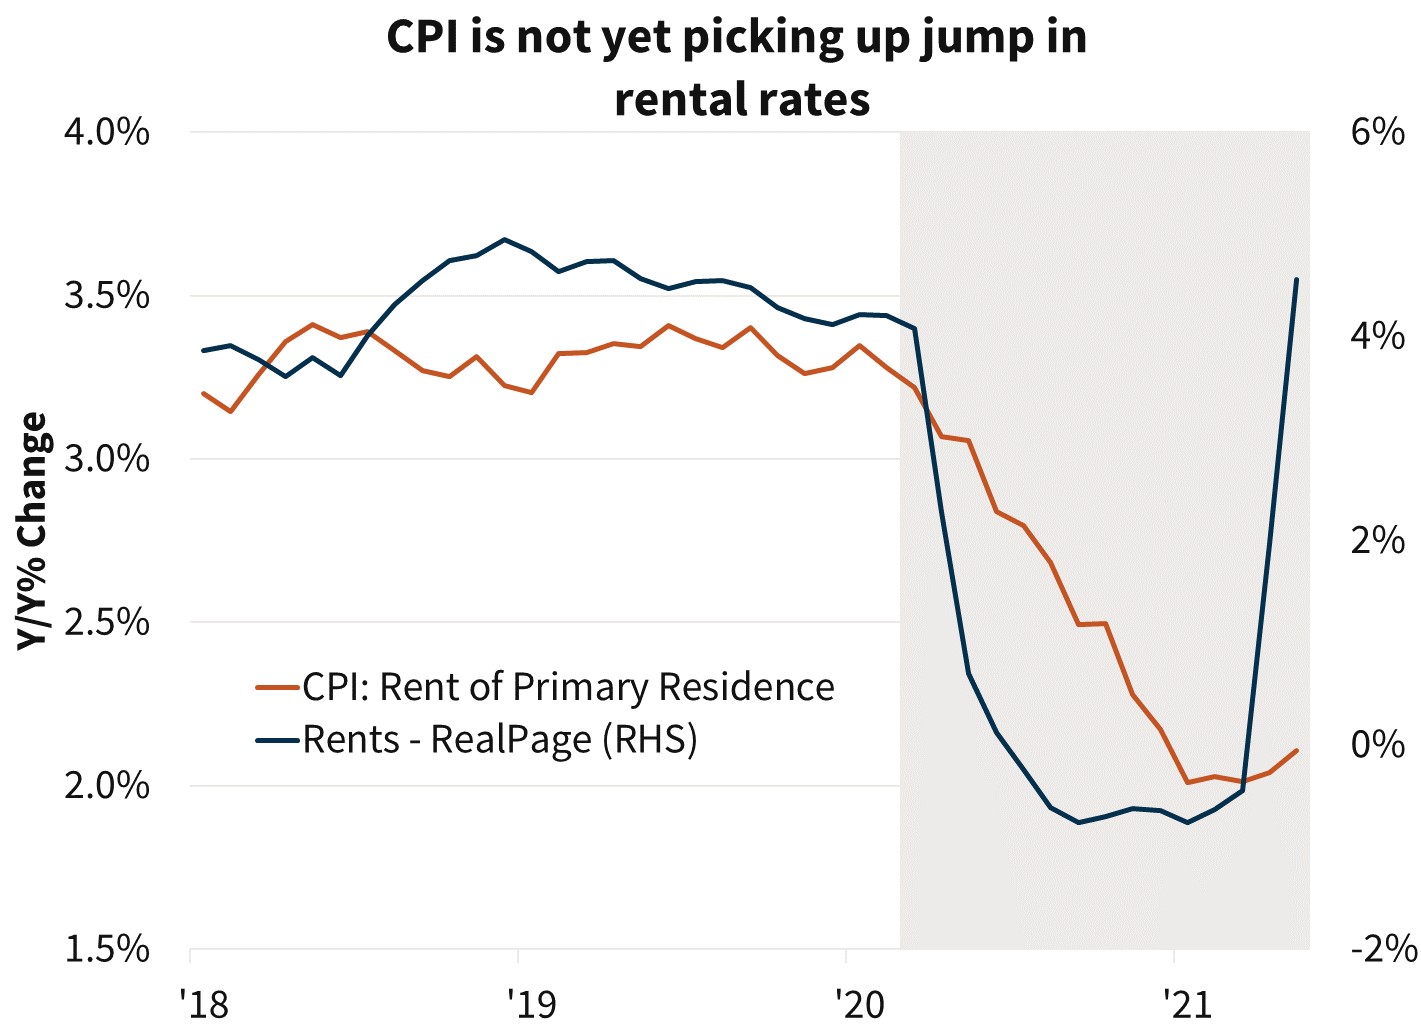  CPI is not yet picking up jump in rental rates 